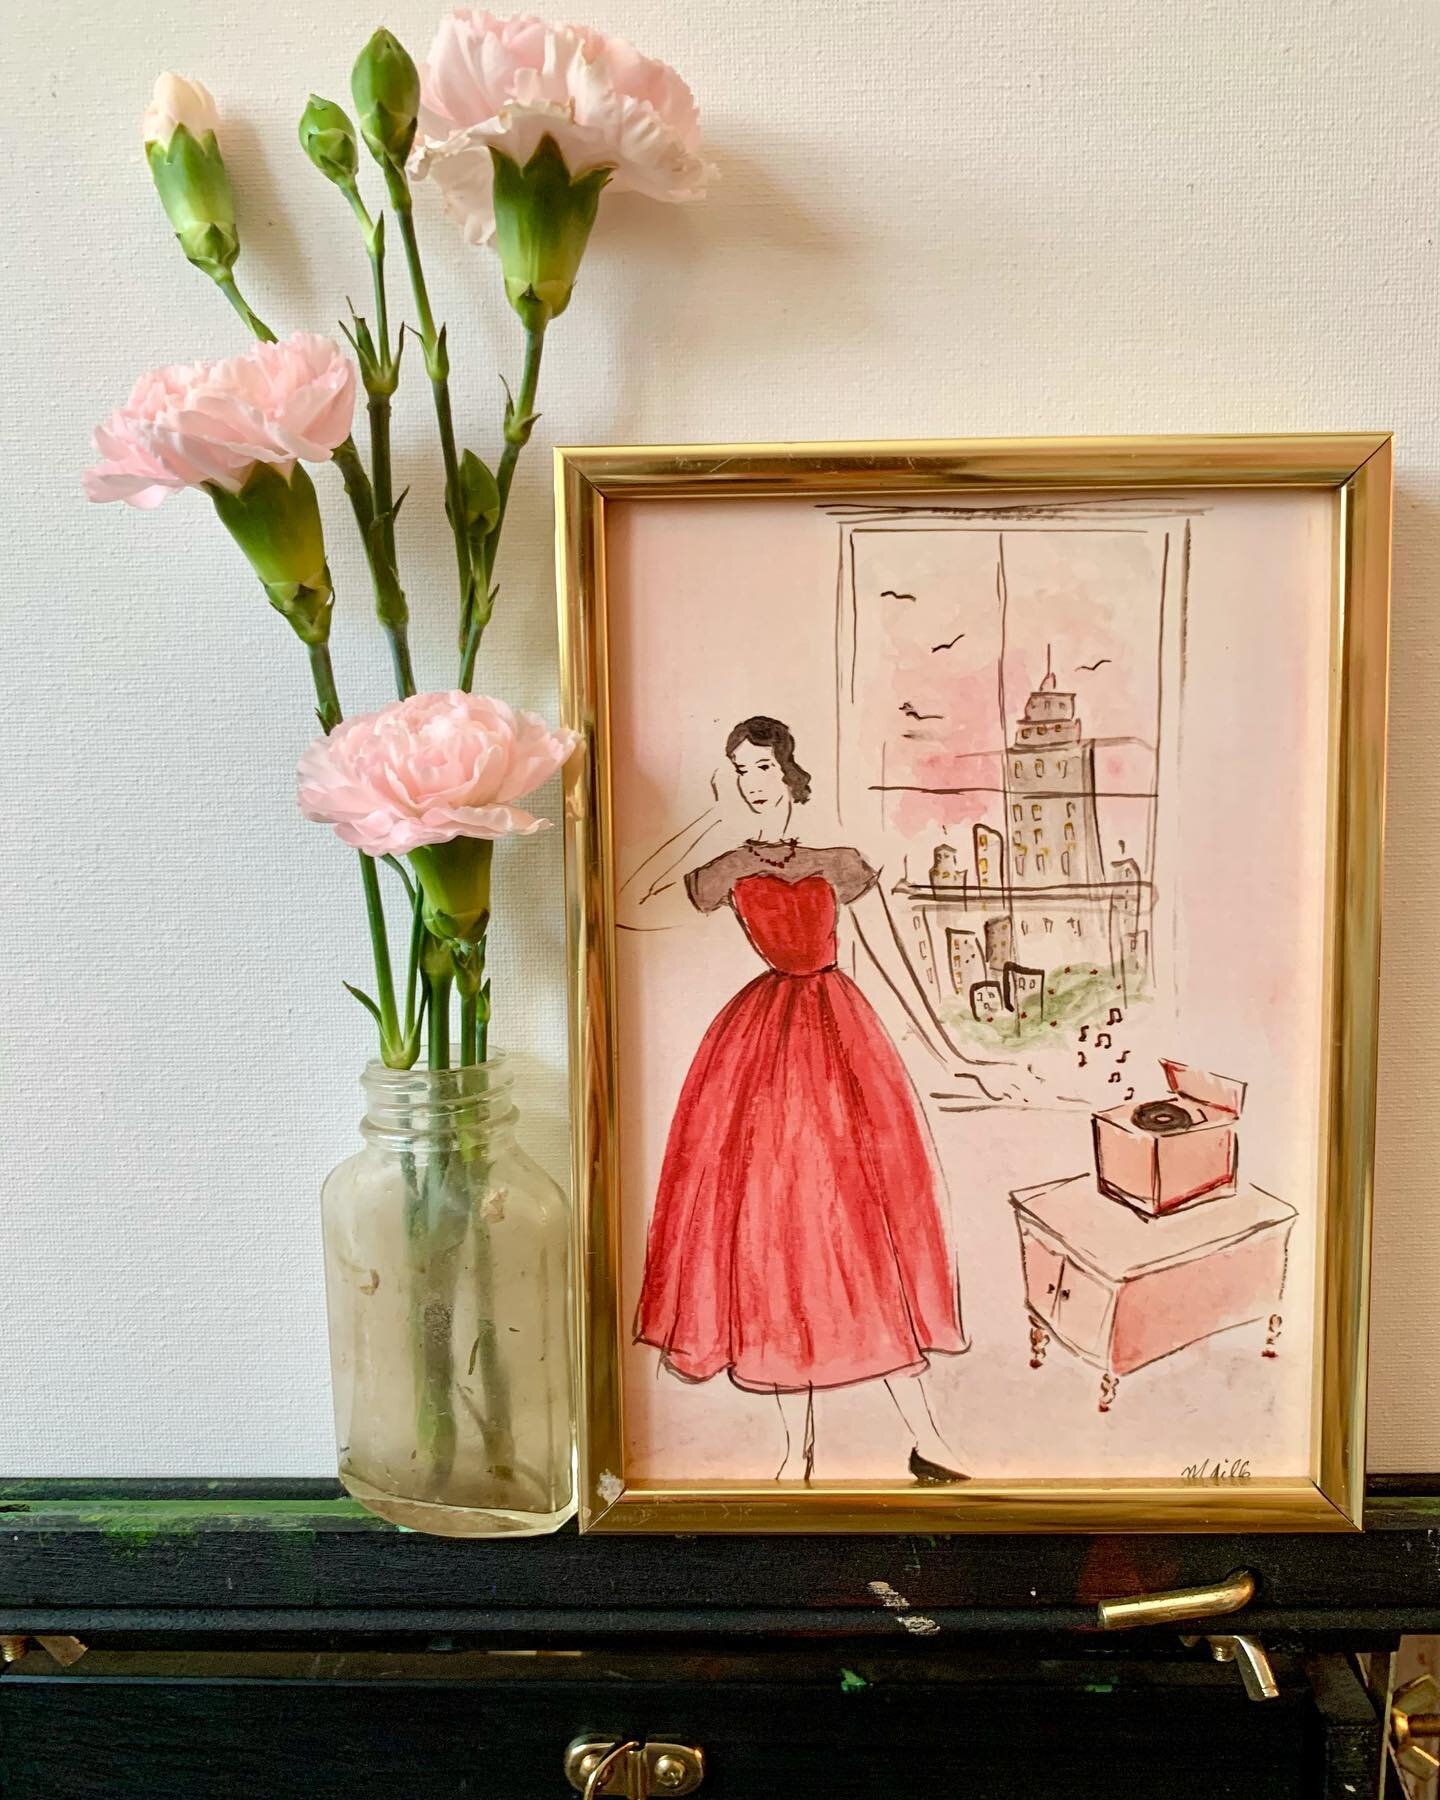 Lots of pretty spring prints available in my #etsy shop!🌷https://etsy.me/3KQrVNJ

#coffeeshopart #cafe #spring #parisiancafe #brushandink #inksketch #watercolor #smallbusiness #artprints #illustration #freelanceartist #connecticut #ctsmallbusiness #